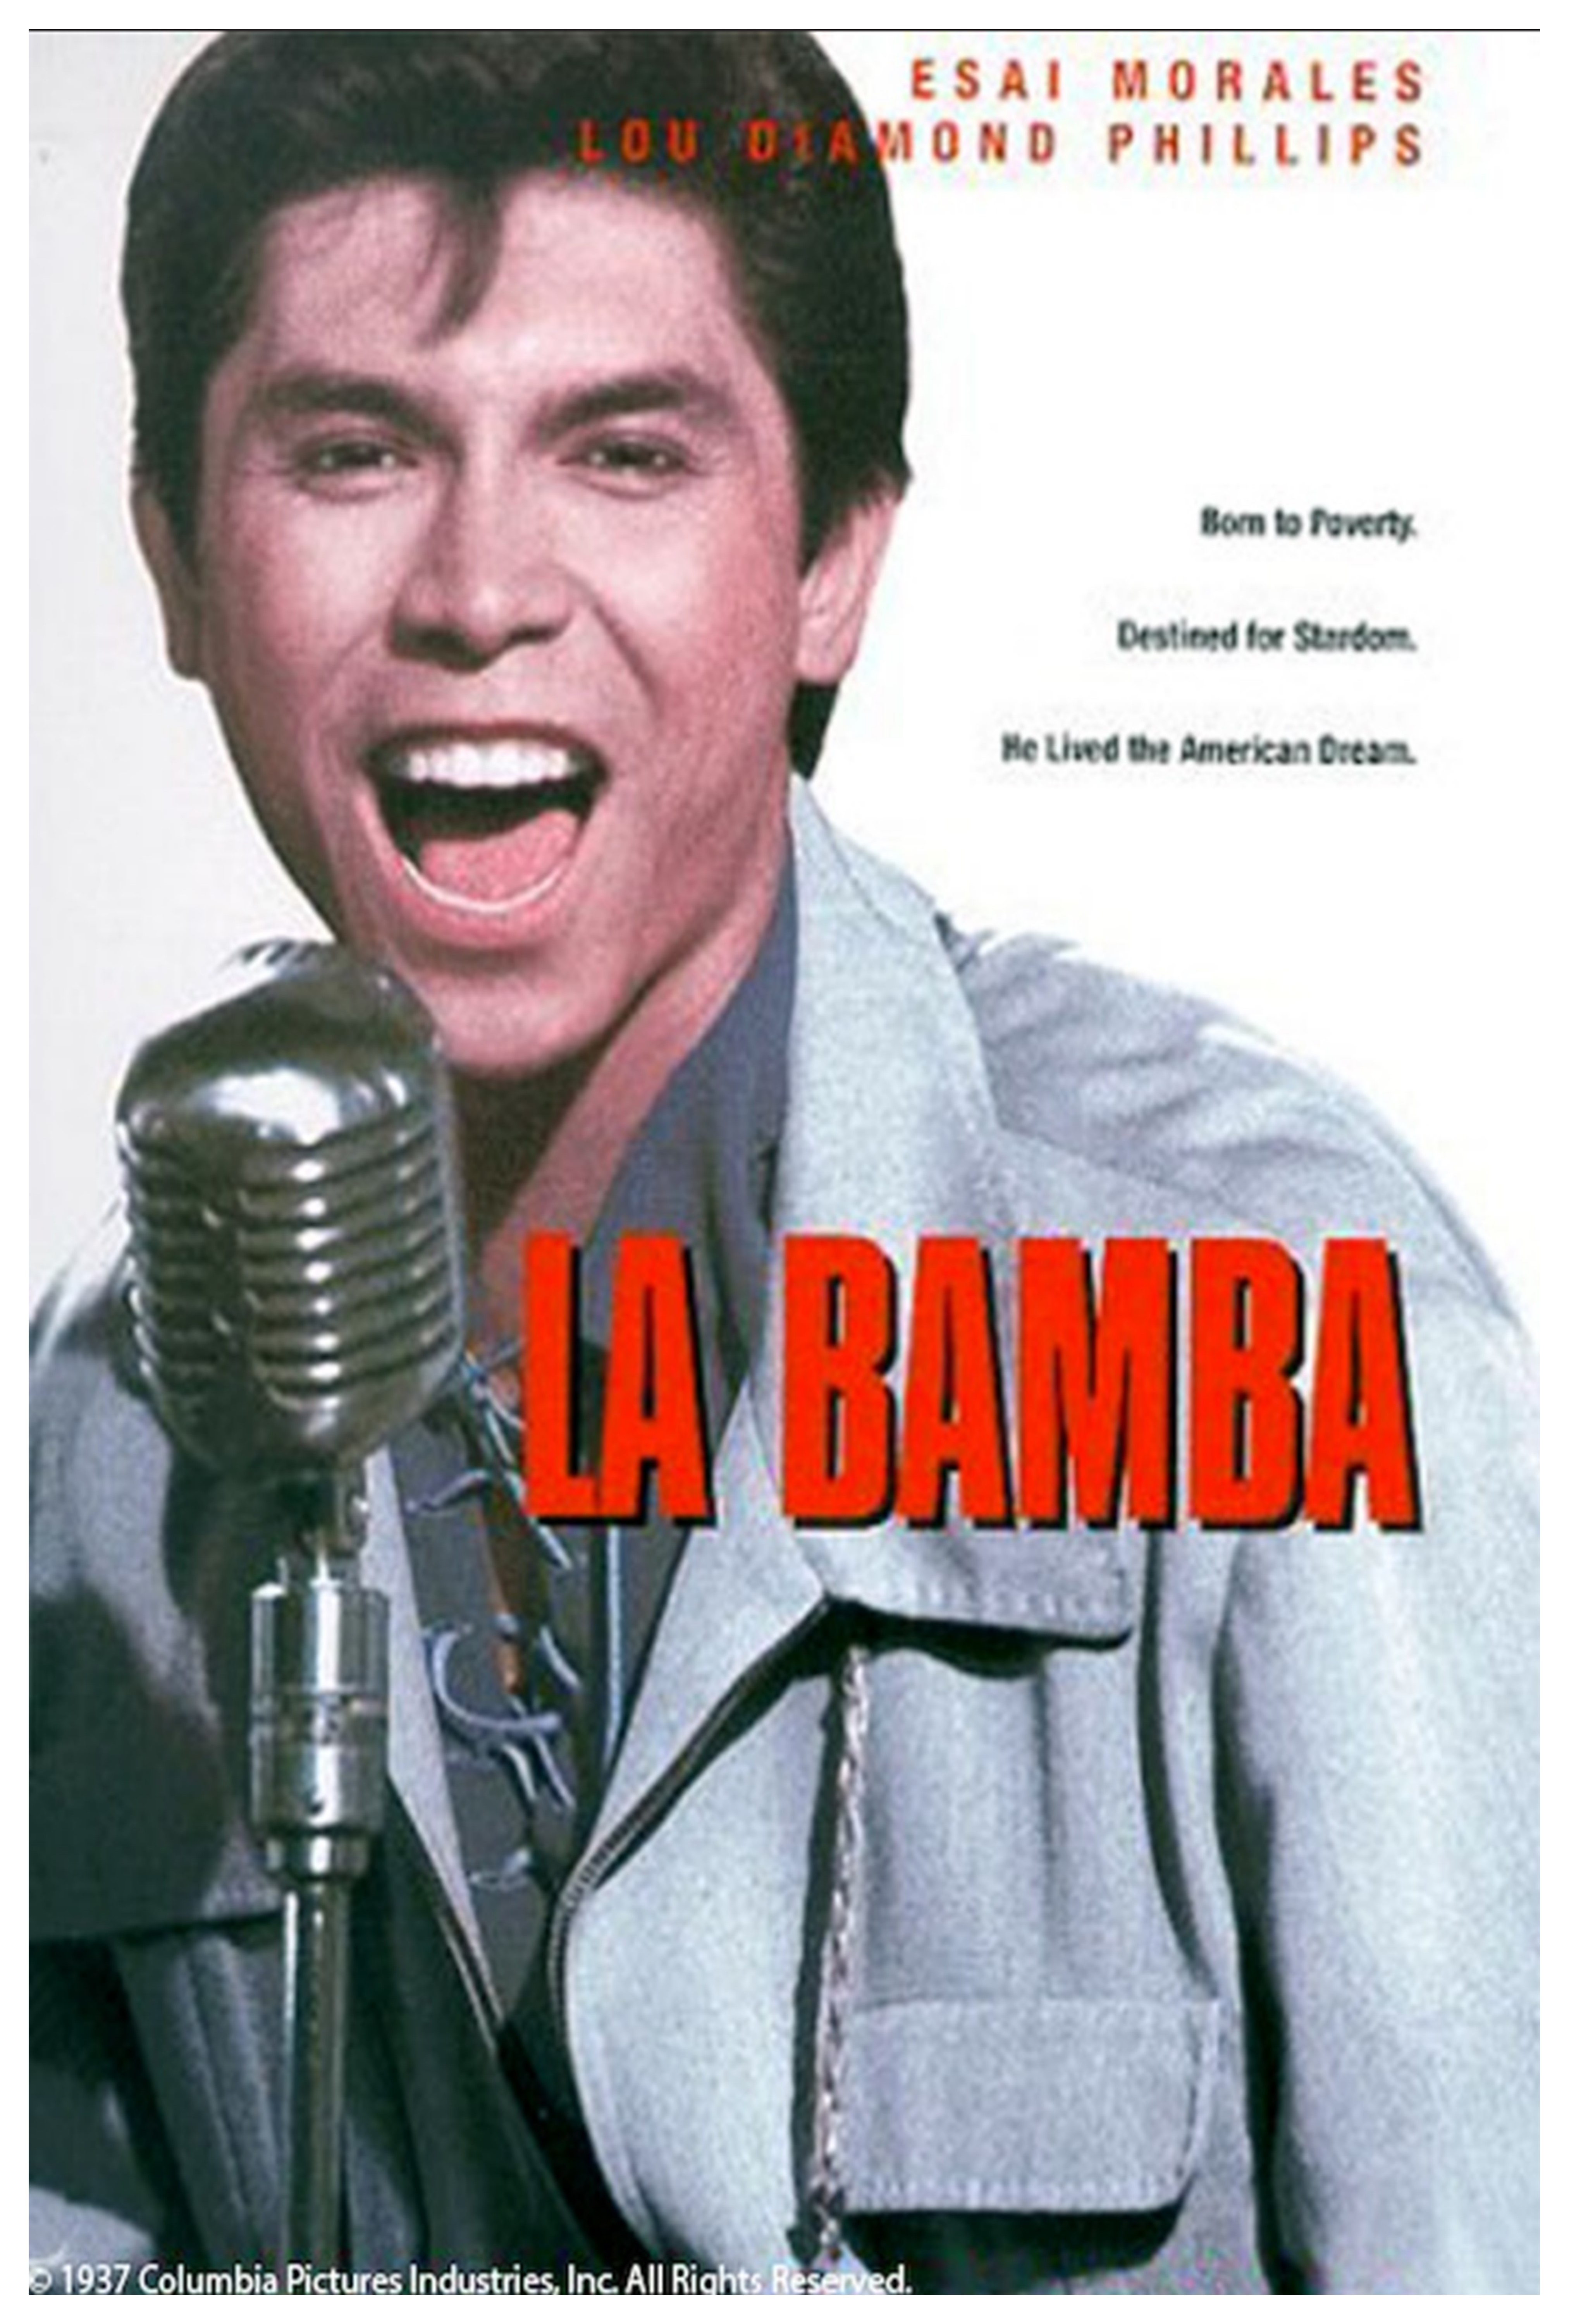 Film poster for La Bamba with red lettering on a white background and image of Lou Diamond Phillips as Ritchie Valens  singing.